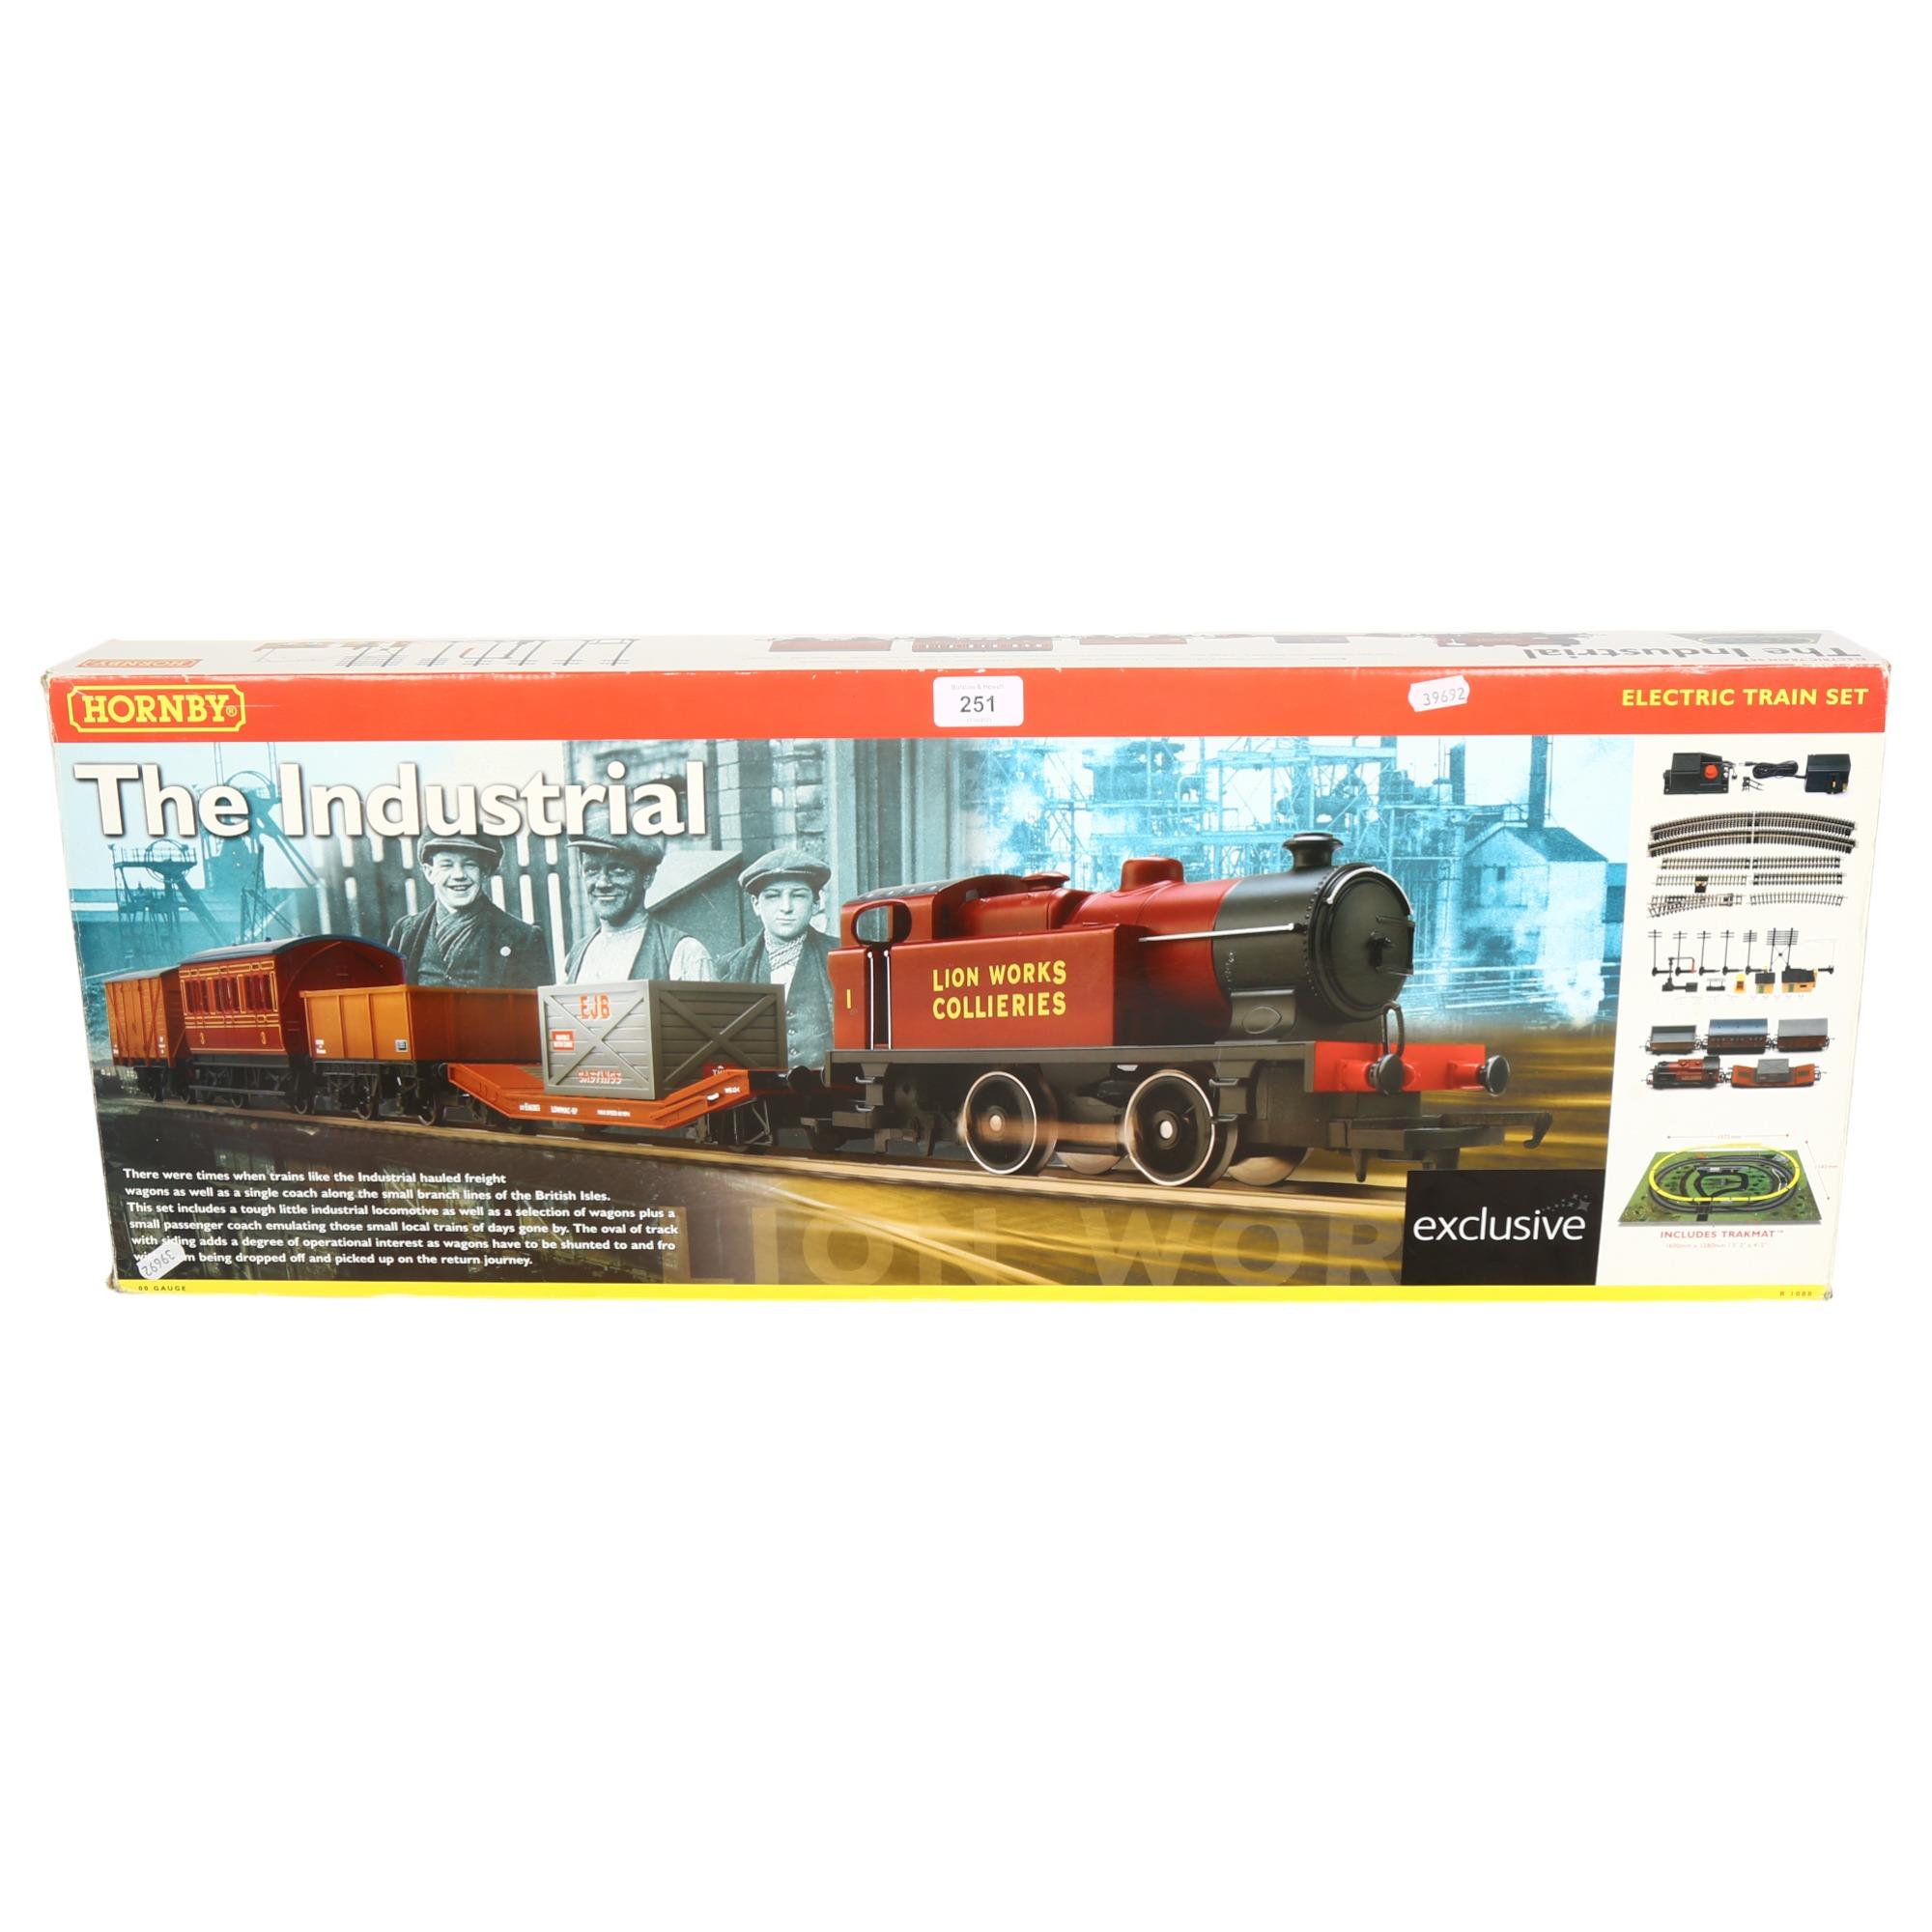 HORNBY - a OO gauge electric train set, The Industrial, ref. R1088, complete in original box